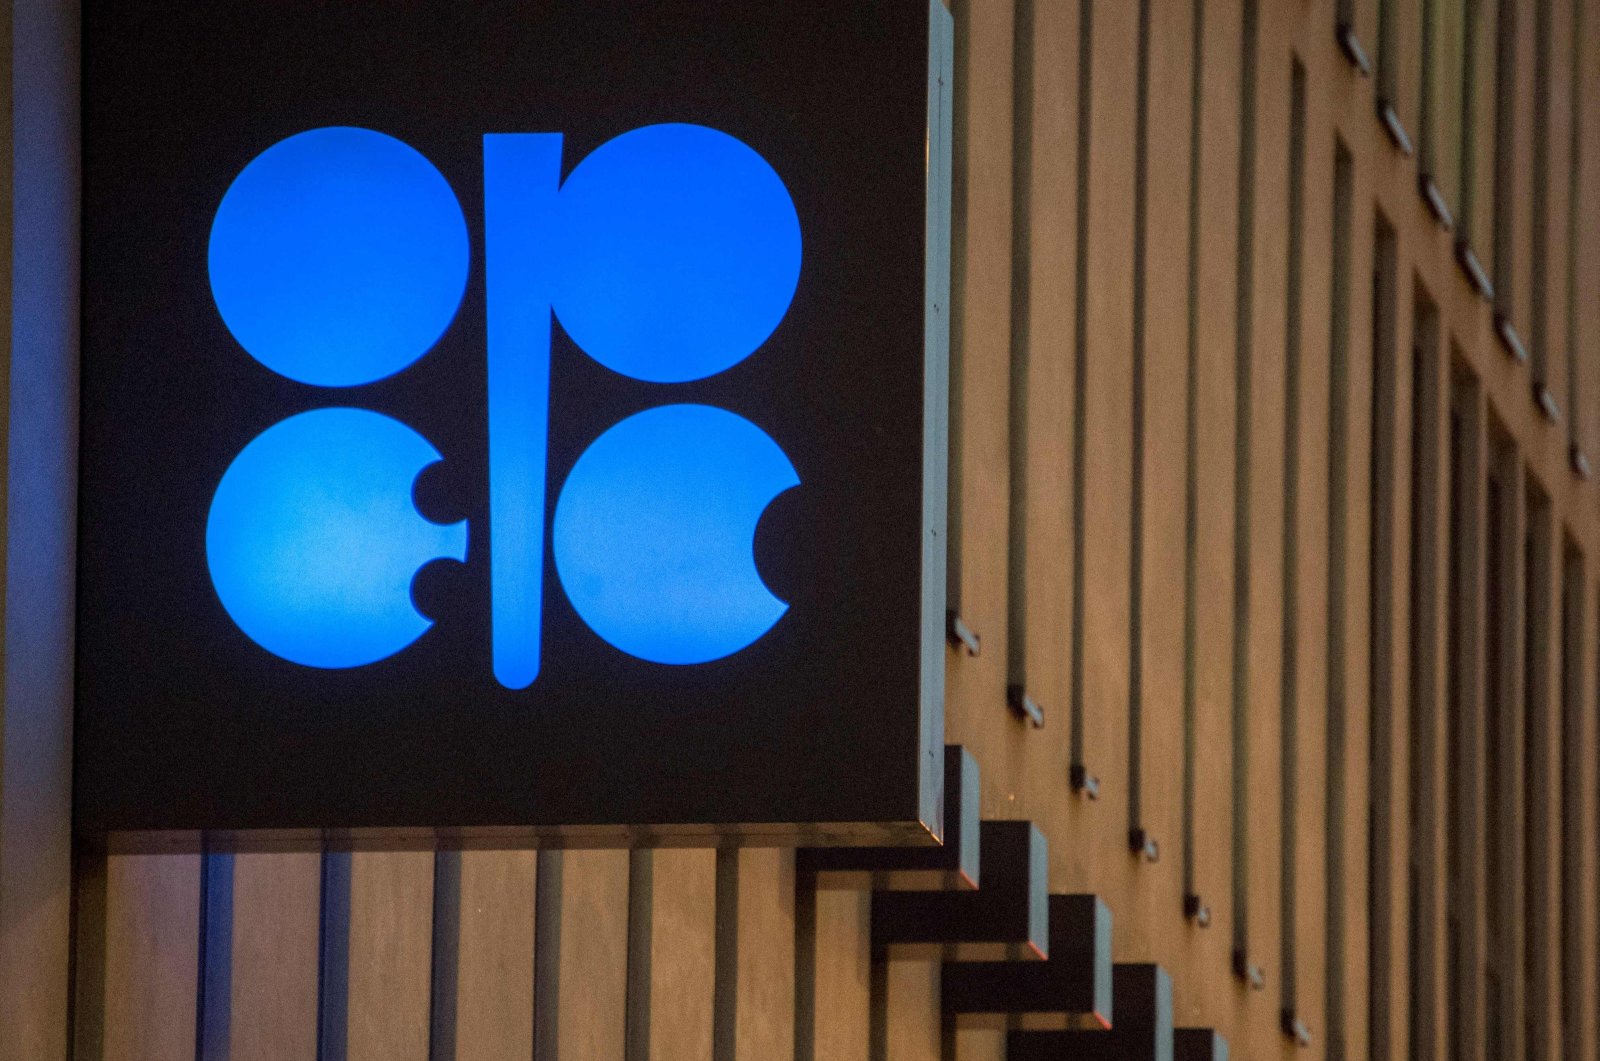 The logo of the Organization of the Petroleum Exporting Countries (OPEC) is pictured at its headquarters on the eve of the 171th meeting of the Organization of the Petroleum Exporting Countries in Vienna, Austria, Nov. 29, 2016. (AFP Photo)